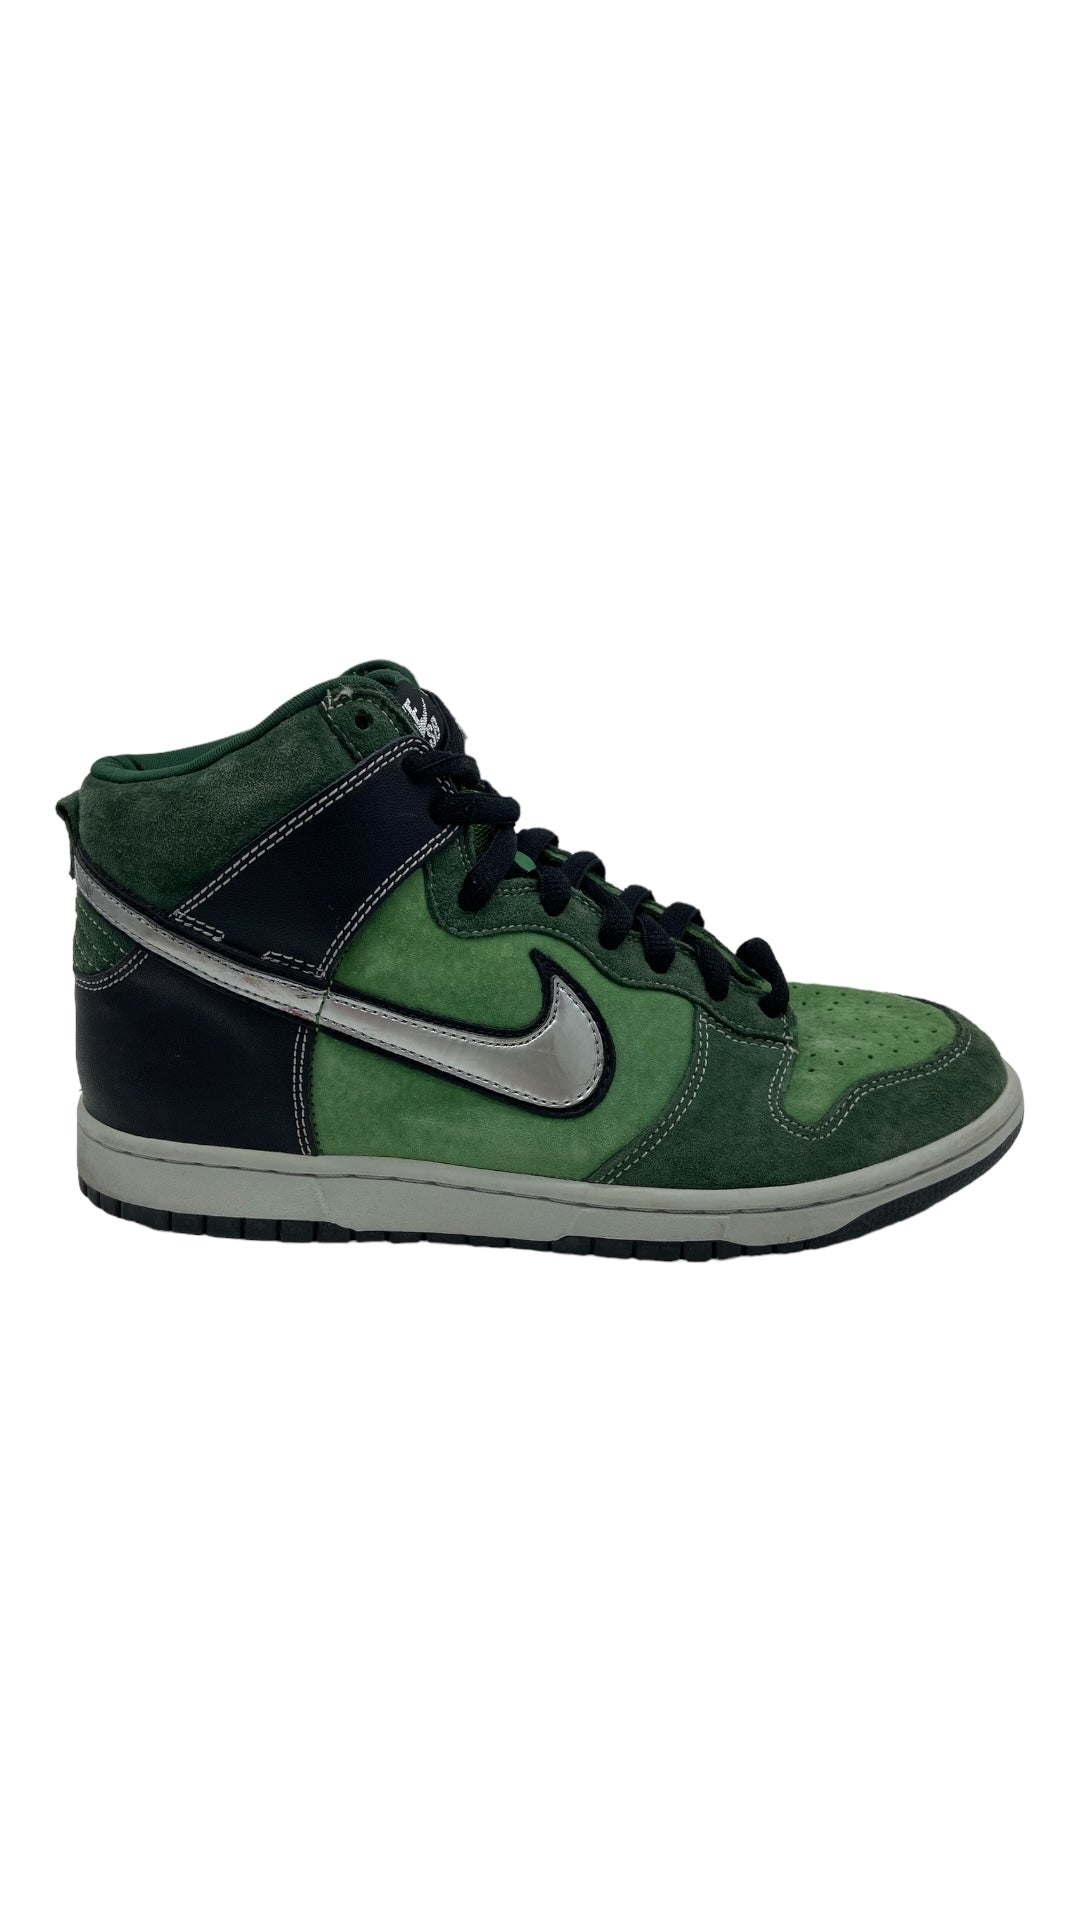 Preowned Nike Dunk High Brut Sz 8.5M/10W 305050-304